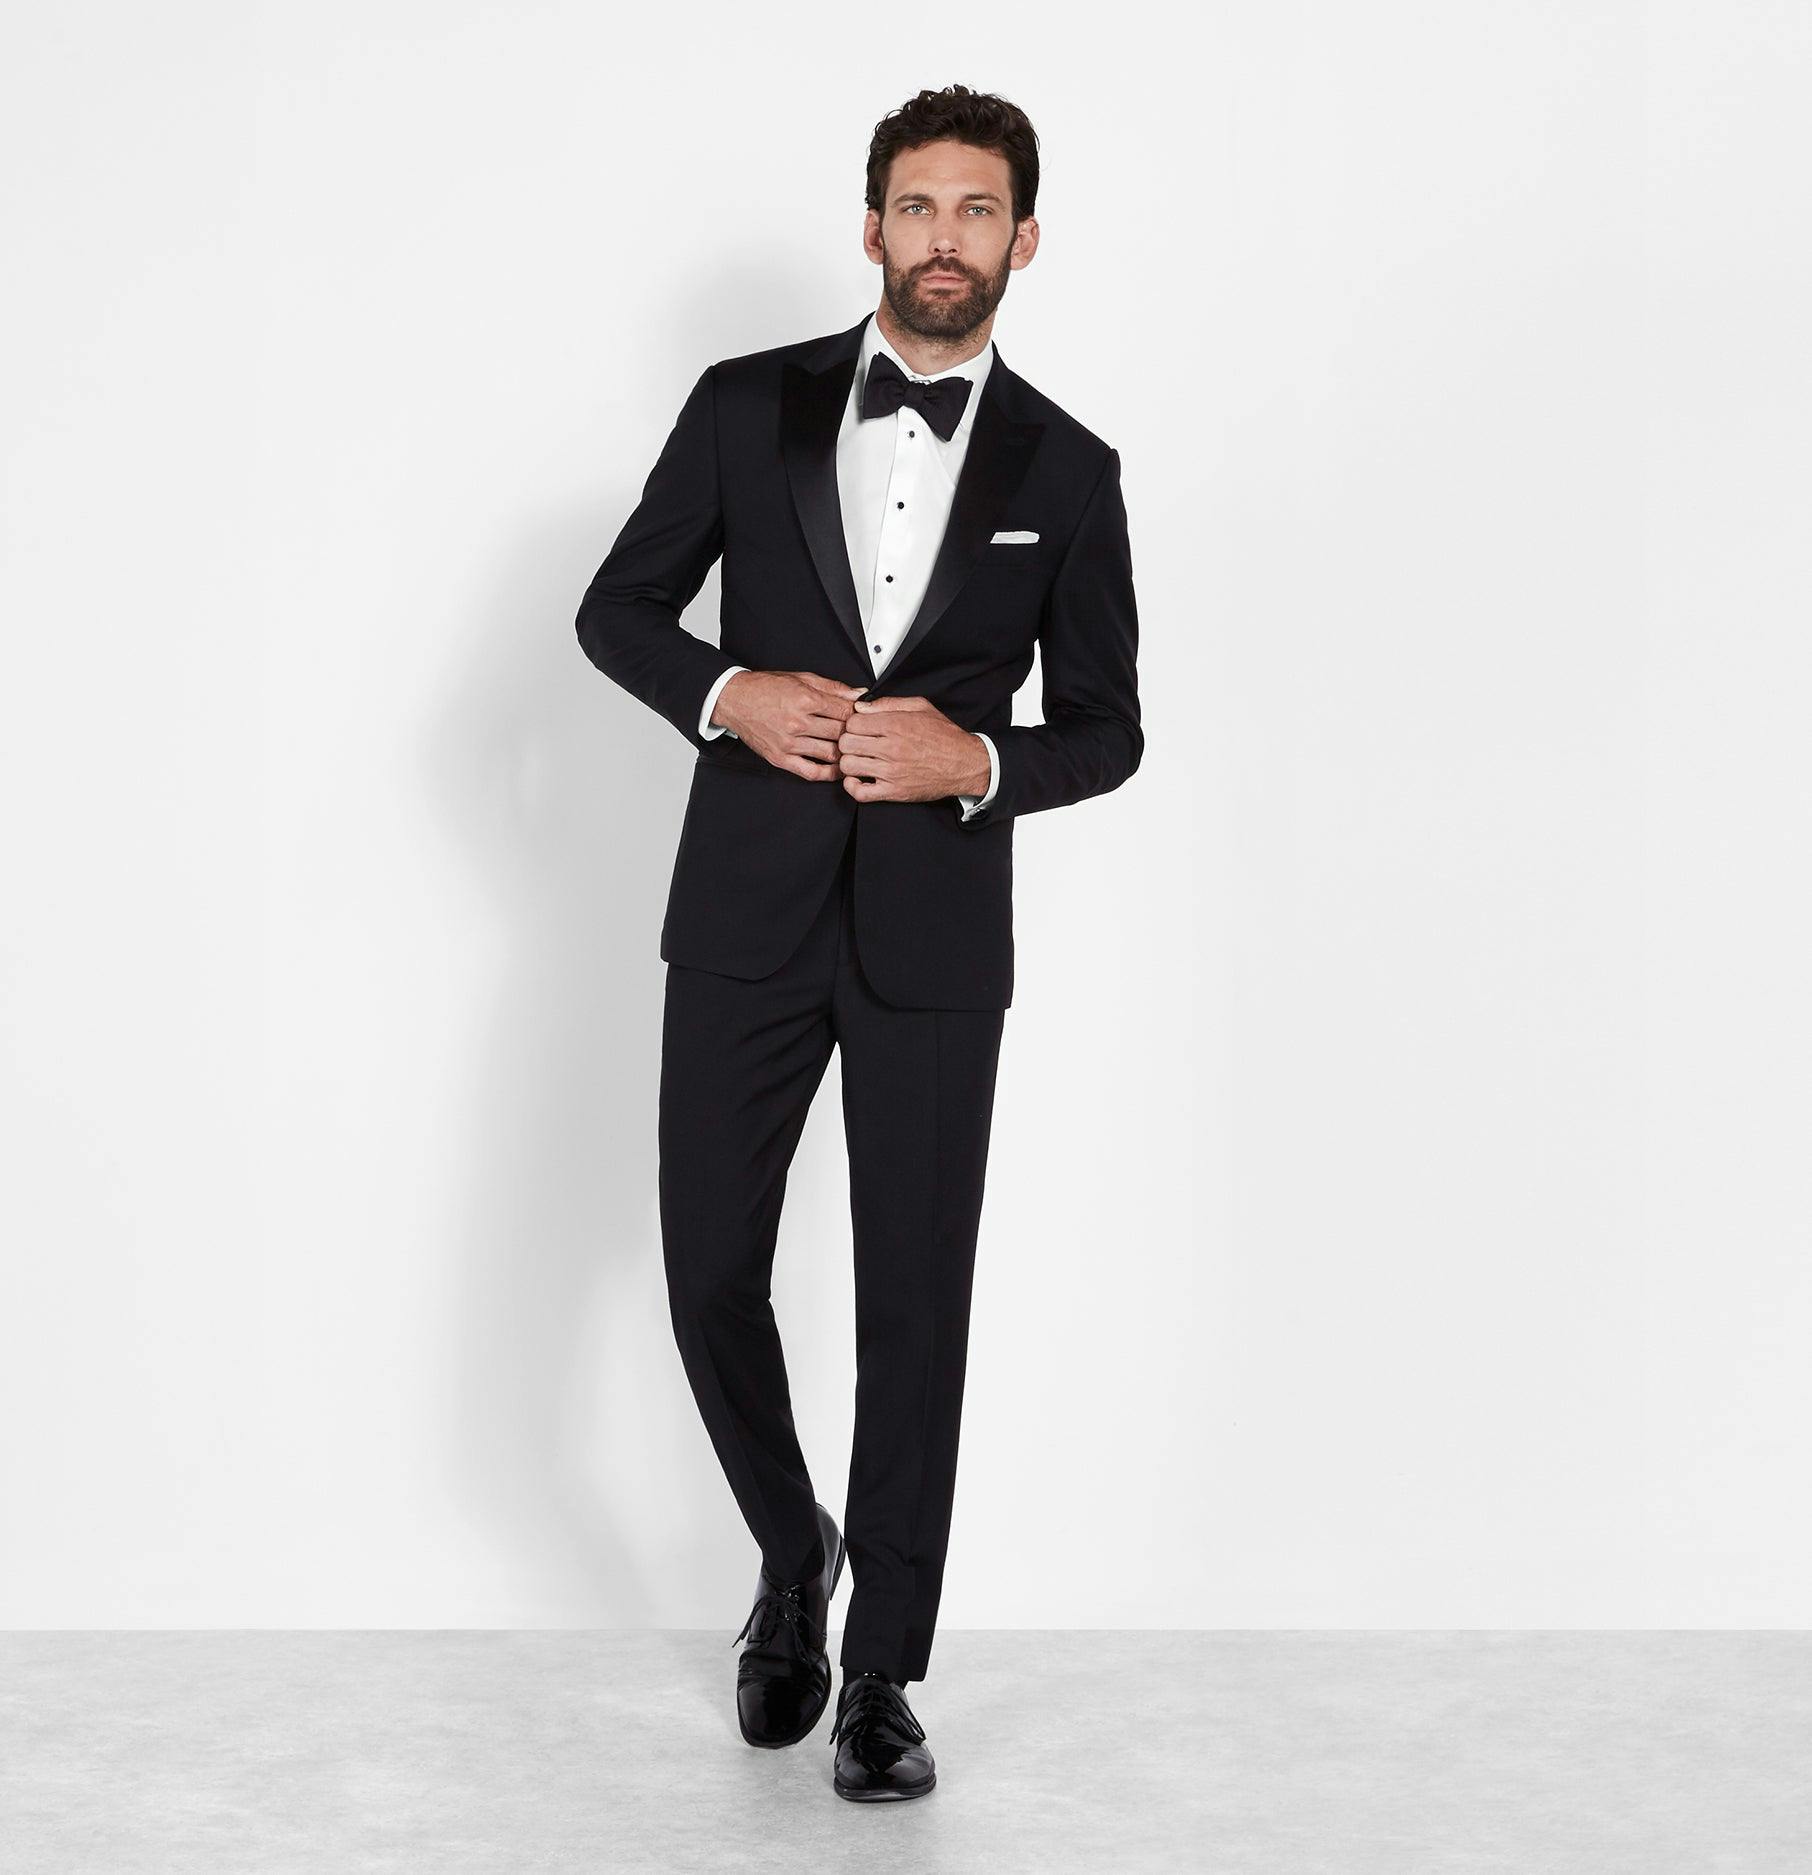 This is peak formalwear style, literally. It's tough to beat the classic yet statement-making look of a peak lapel tuxedo plus, the upward-pointing lapels frame your face and elongate your frame. Win, win.

Includes jacket and pants. Pants are available in classic and slim fits.